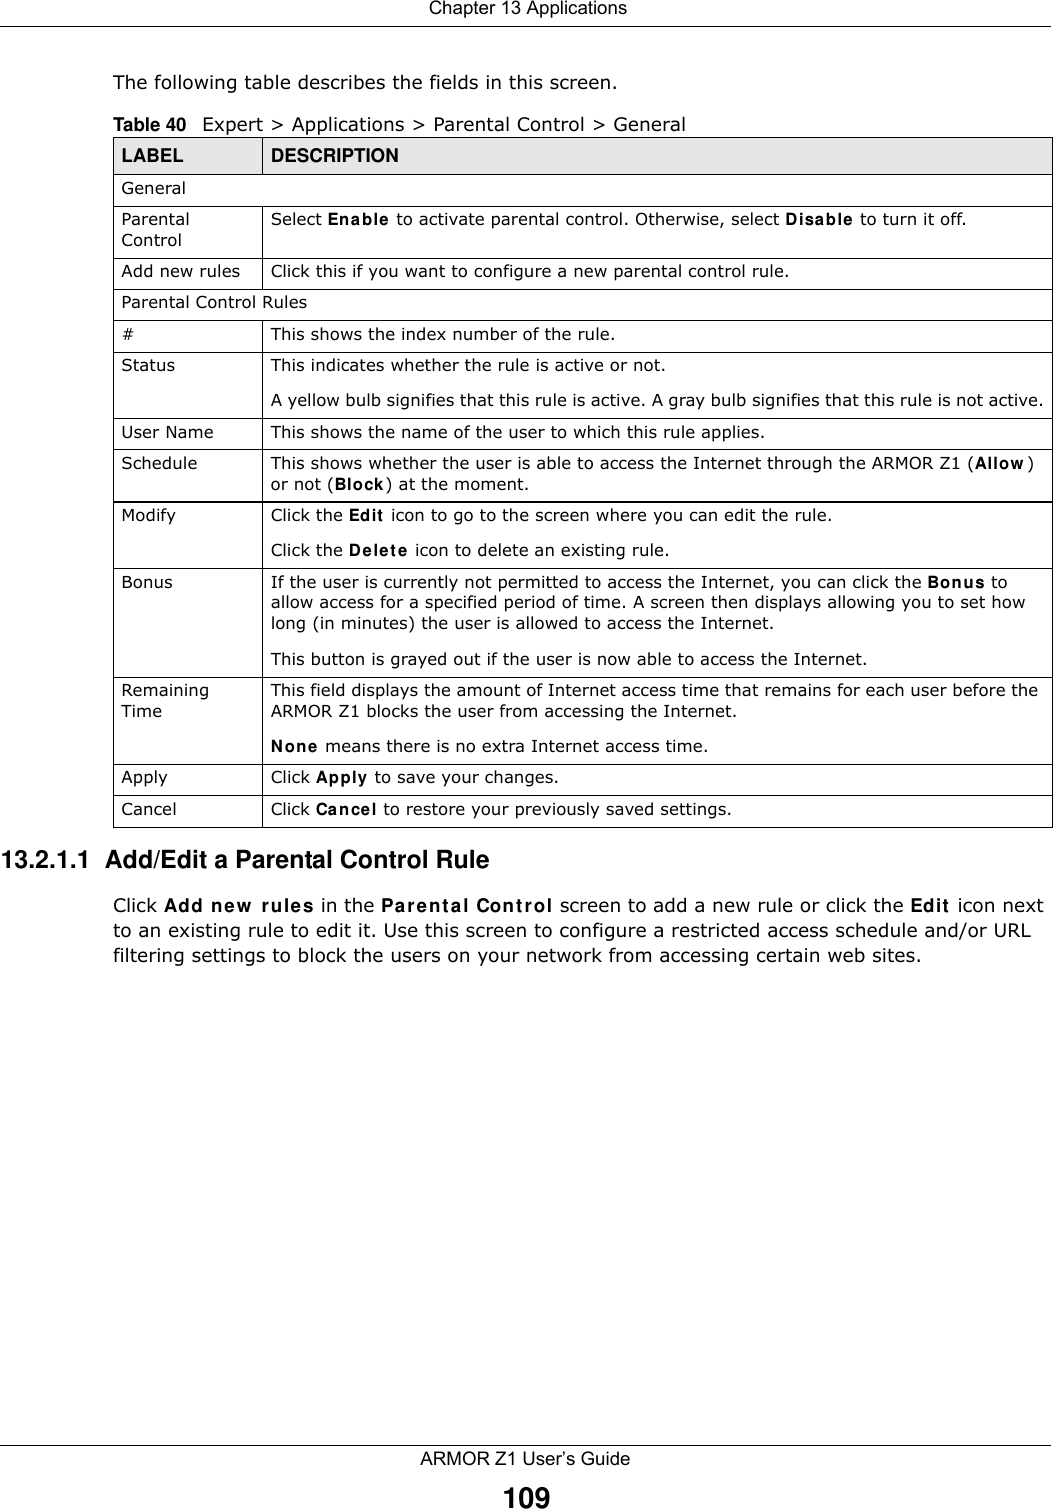  Chapter 13 ApplicationsARMOR Z1 User’s Guide109The following table describes the fields in this screen. 13.2.1.1  Add/Edit a Parental Control RuleClick Add new rules in the Parental Control screen to add a new rule or click the Edit icon next to an existing rule to edit it. Use this screen to configure a restricted access schedule and/or URL filtering settings to block the users on your network from accessing certain web sites.Table 40   Expert &gt; Applications &gt; Parental Control &gt; GeneralLABEL DESCRIPTIONGeneralParental ControlSelect Enable to activate parental control. Otherwise, select Disable to turn it off.Add new rules Click this if you want to configure a new parental control rule.Parental Control Rules#This shows the index number of the rule.Status This indicates whether the rule is active or not.A yellow bulb signifies that this rule is active. A gray bulb signifies that this rule is not active.User Name This shows the name of the user to which this rule applies.Schedule This shows whether the user is able to access the Internet through the ARMOR Z1 (Allow) or not (Block) at the moment.Modify Click the Edit icon to go to the screen where you can edit the rule.Click the Delete icon to delete an existing rule.Bonus If the user is currently not permitted to access the Internet, you can click the Bonus to allow access for a specified period of time. A screen then displays allowing you to set how long (in minutes) the user is allowed to access the Internet.This button is grayed out if the user is now able to access the Internet.Remaining TimeThis field displays the amount of Internet access time that remains for each user before the ARMOR Z1 blocks the user from accessing the Internet.None means there is no extra Internet access time. Apply Click Apply to save your changes.Cancel Click Cancel to restore your previously saved settings.